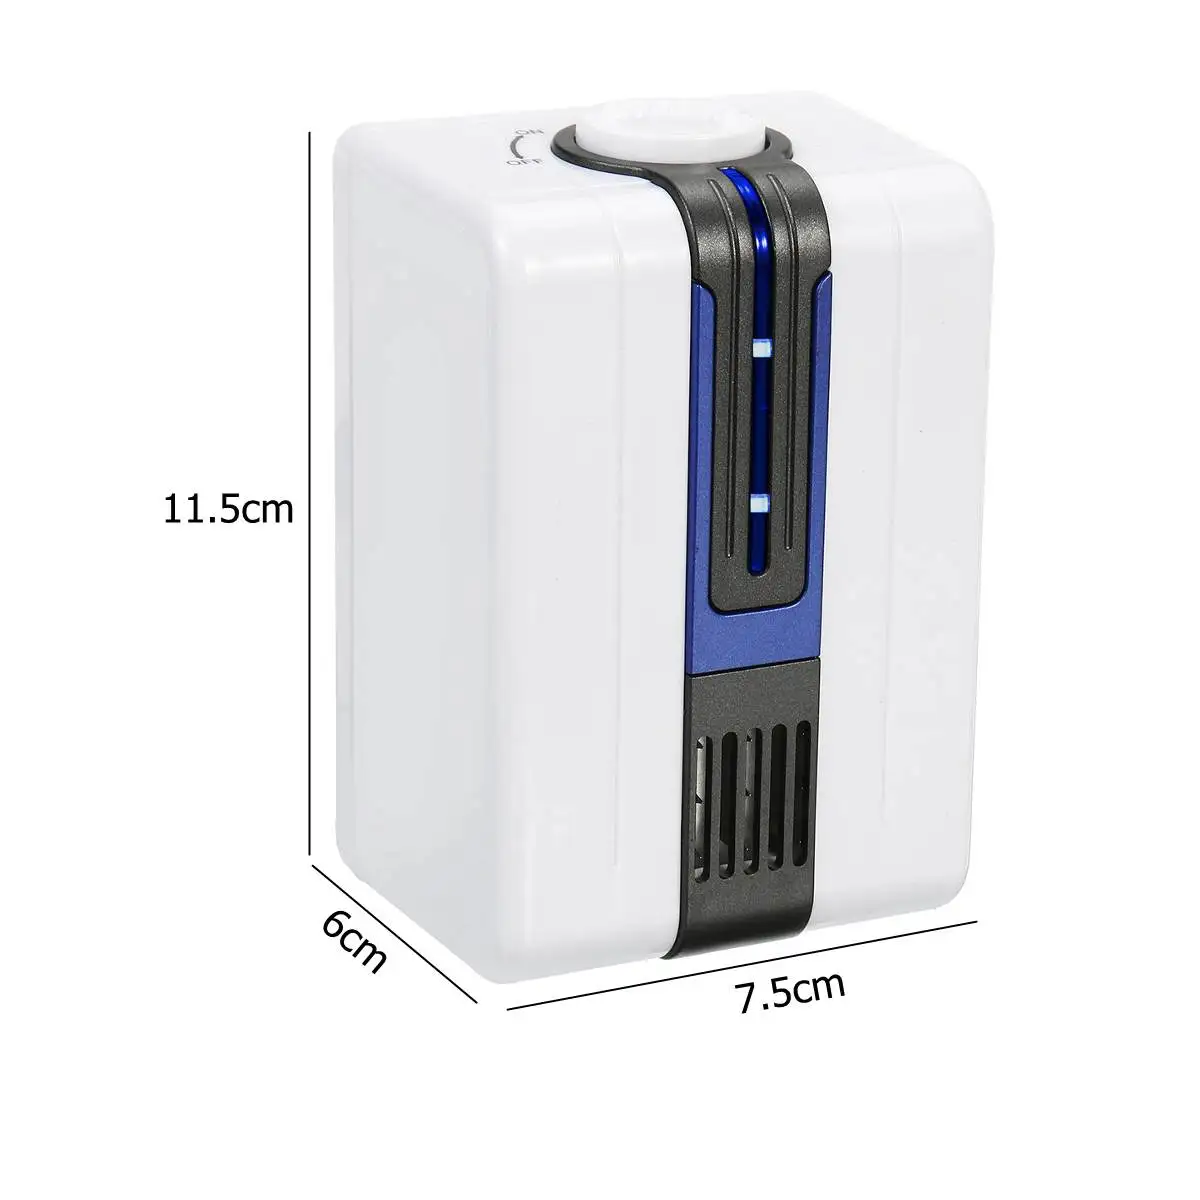 

110V/220V Home Ionizer Purifiers Ozonator Air Cleaner Oxygen Purify Kill Bacteria Clear Peculiar Smell Smoke